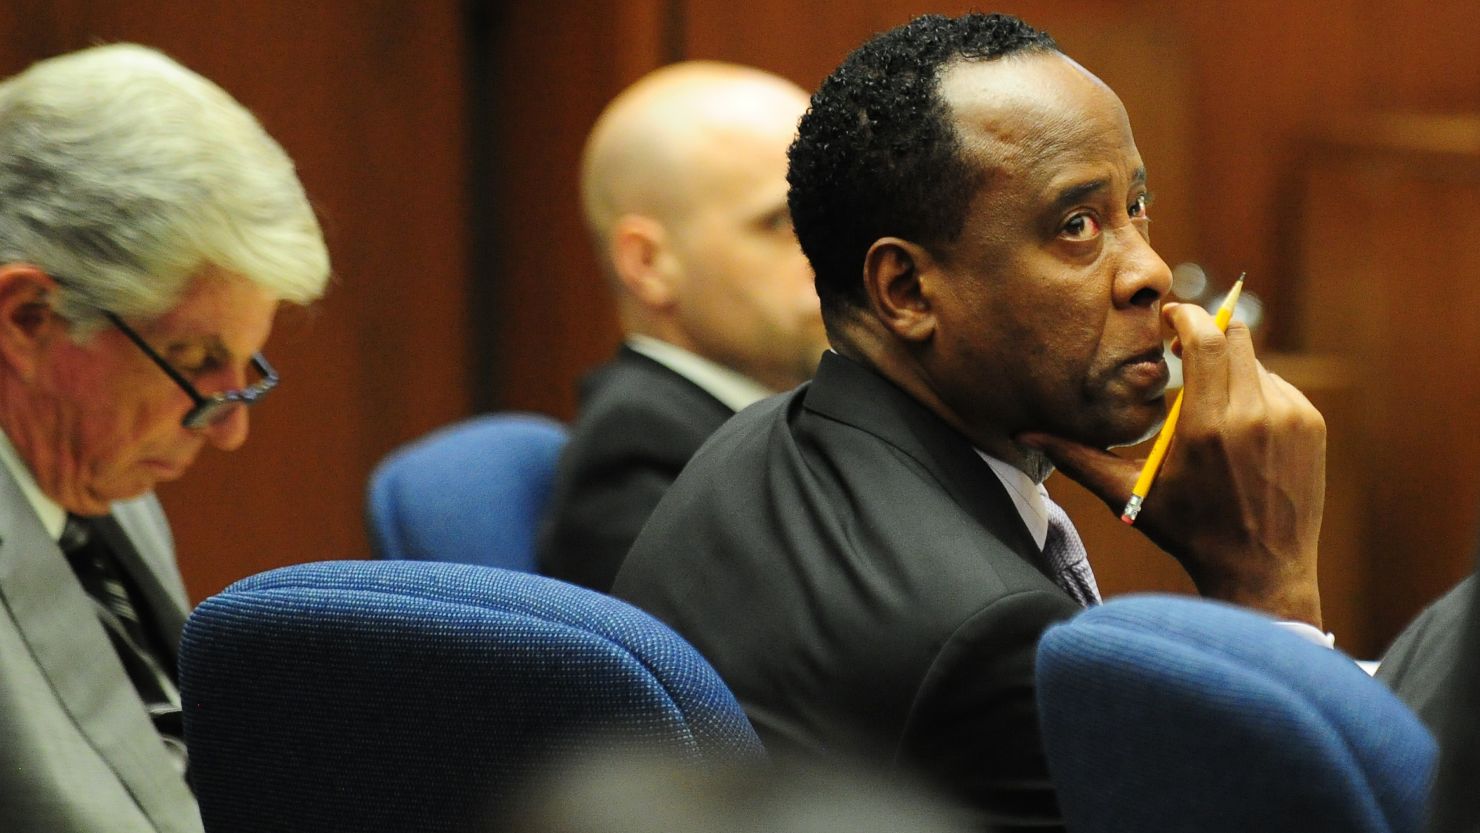 The Conrad Murray trial resumed Wednesday with an anesthesiology expert on the witness stand.